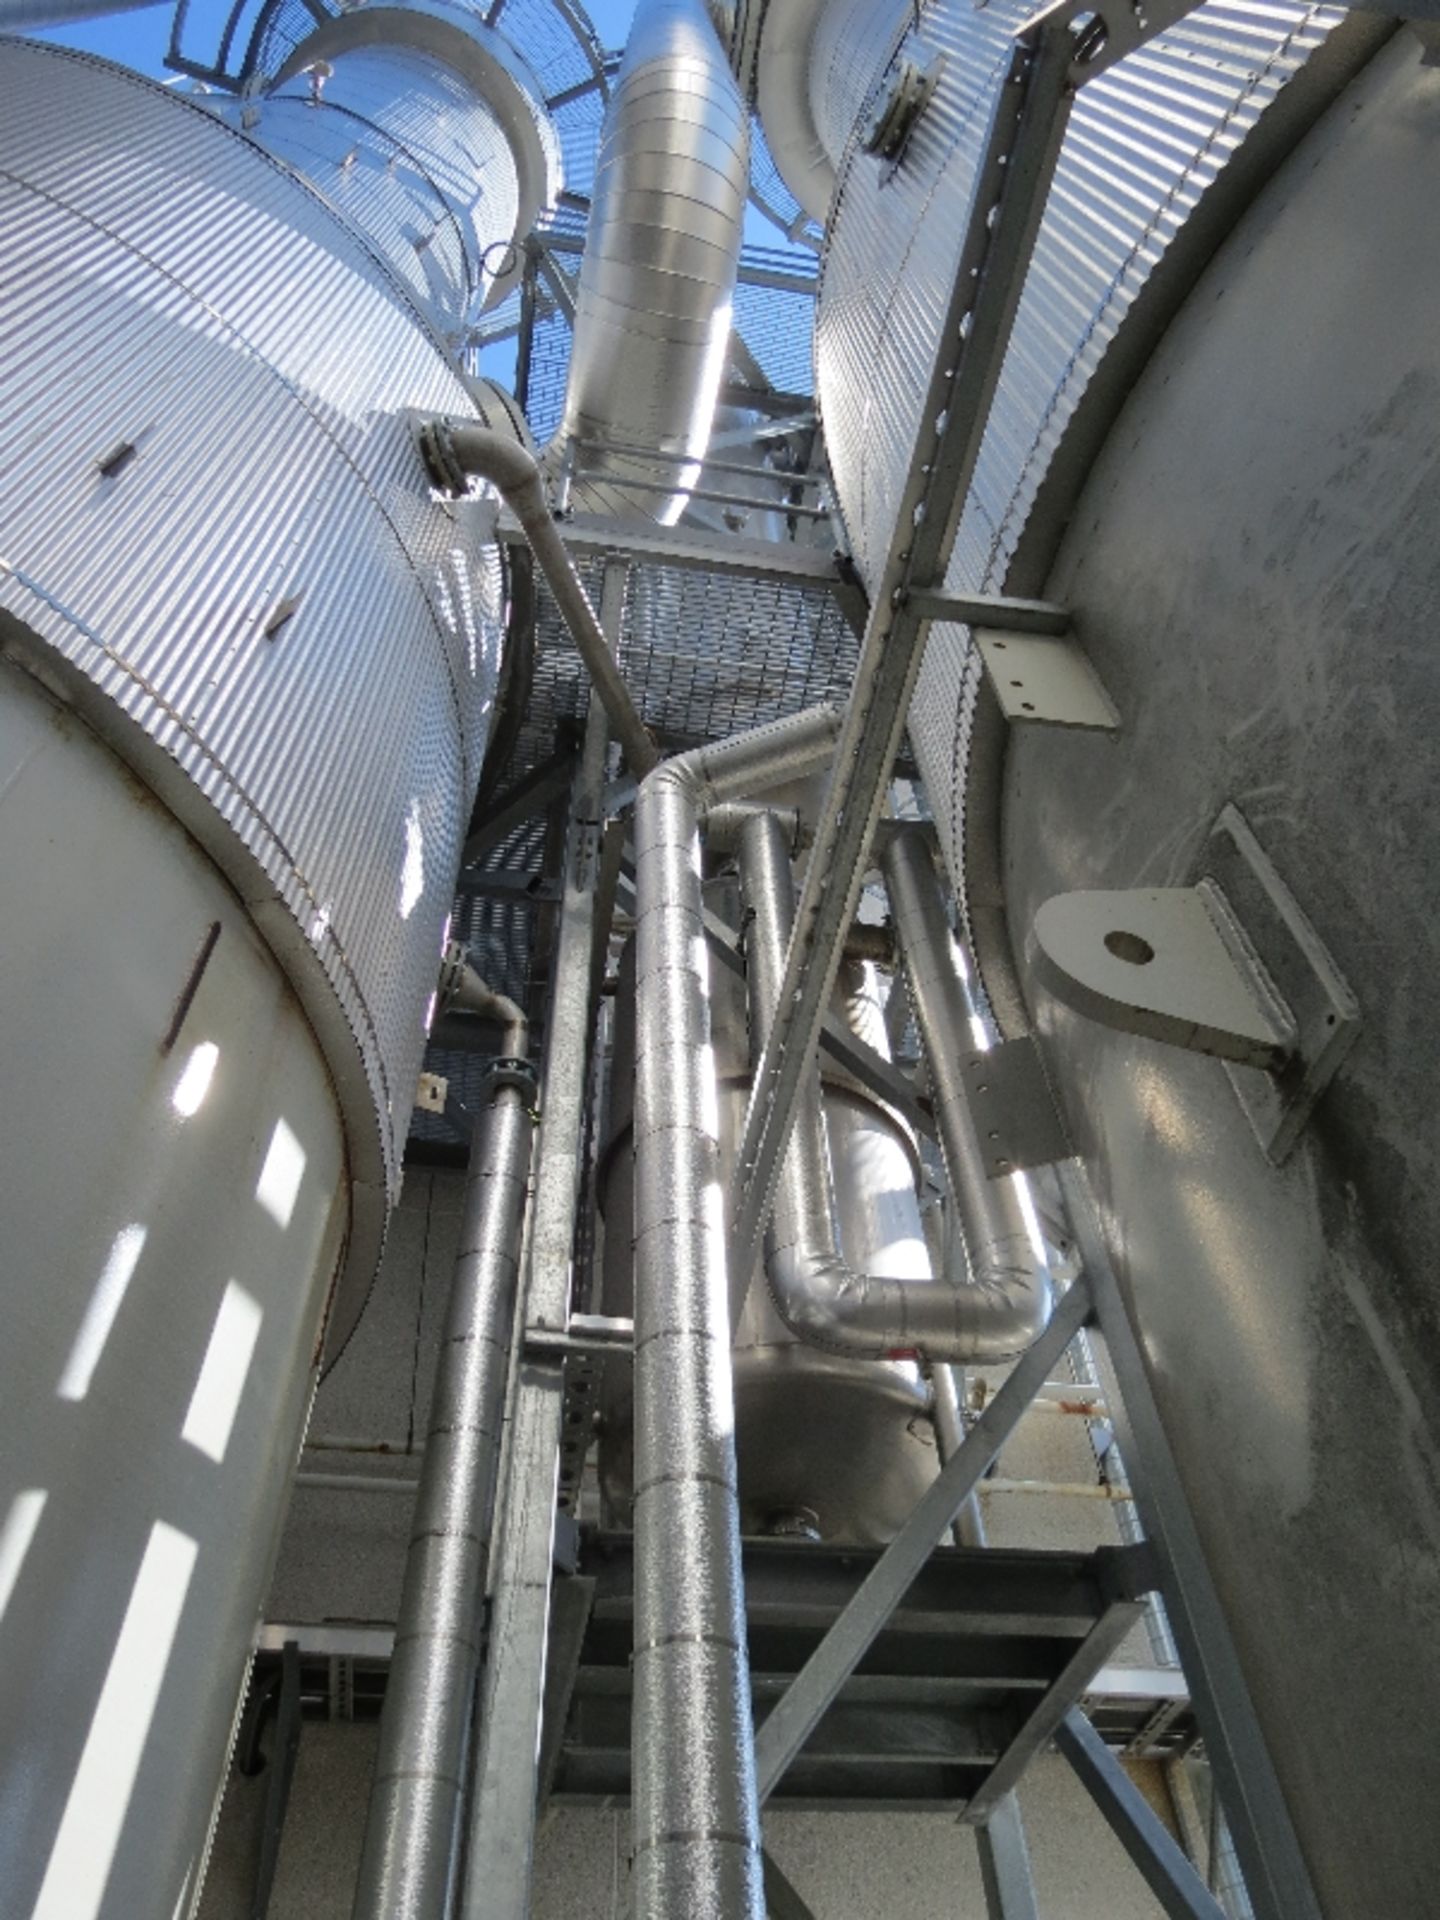 Triple Effect Evaporation system Stainless Steel - Image 5 of 18